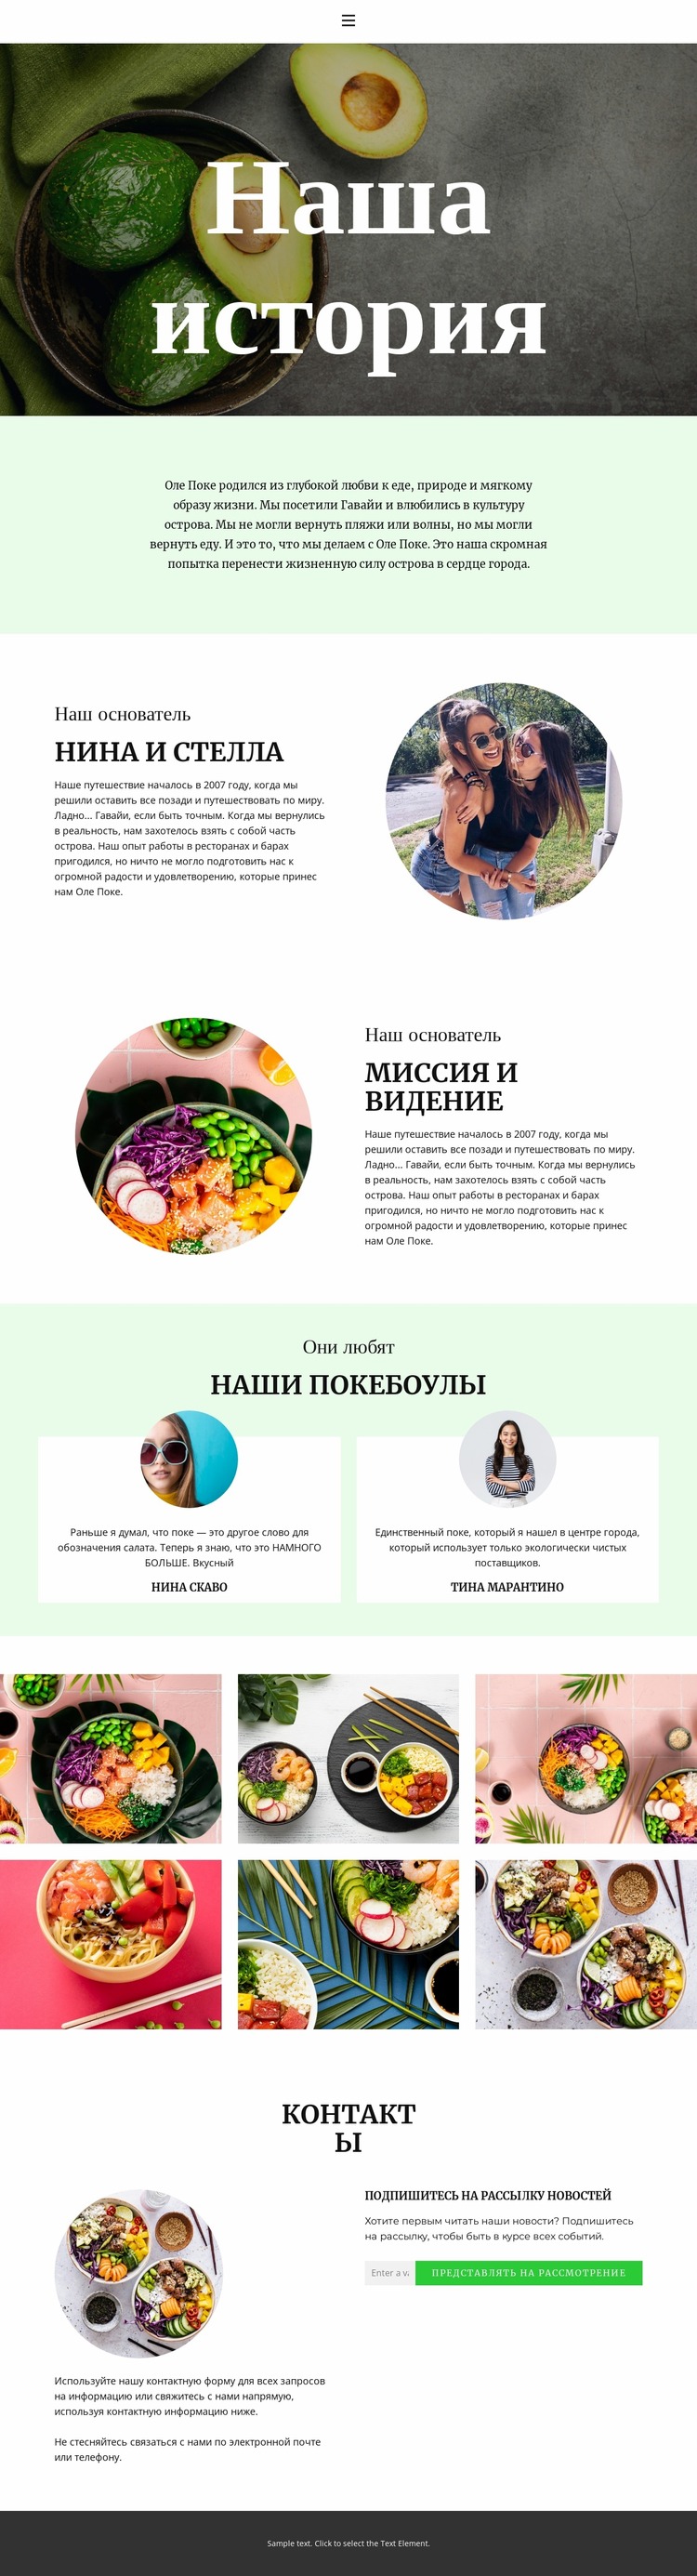 About our founder Шаблон Joomla